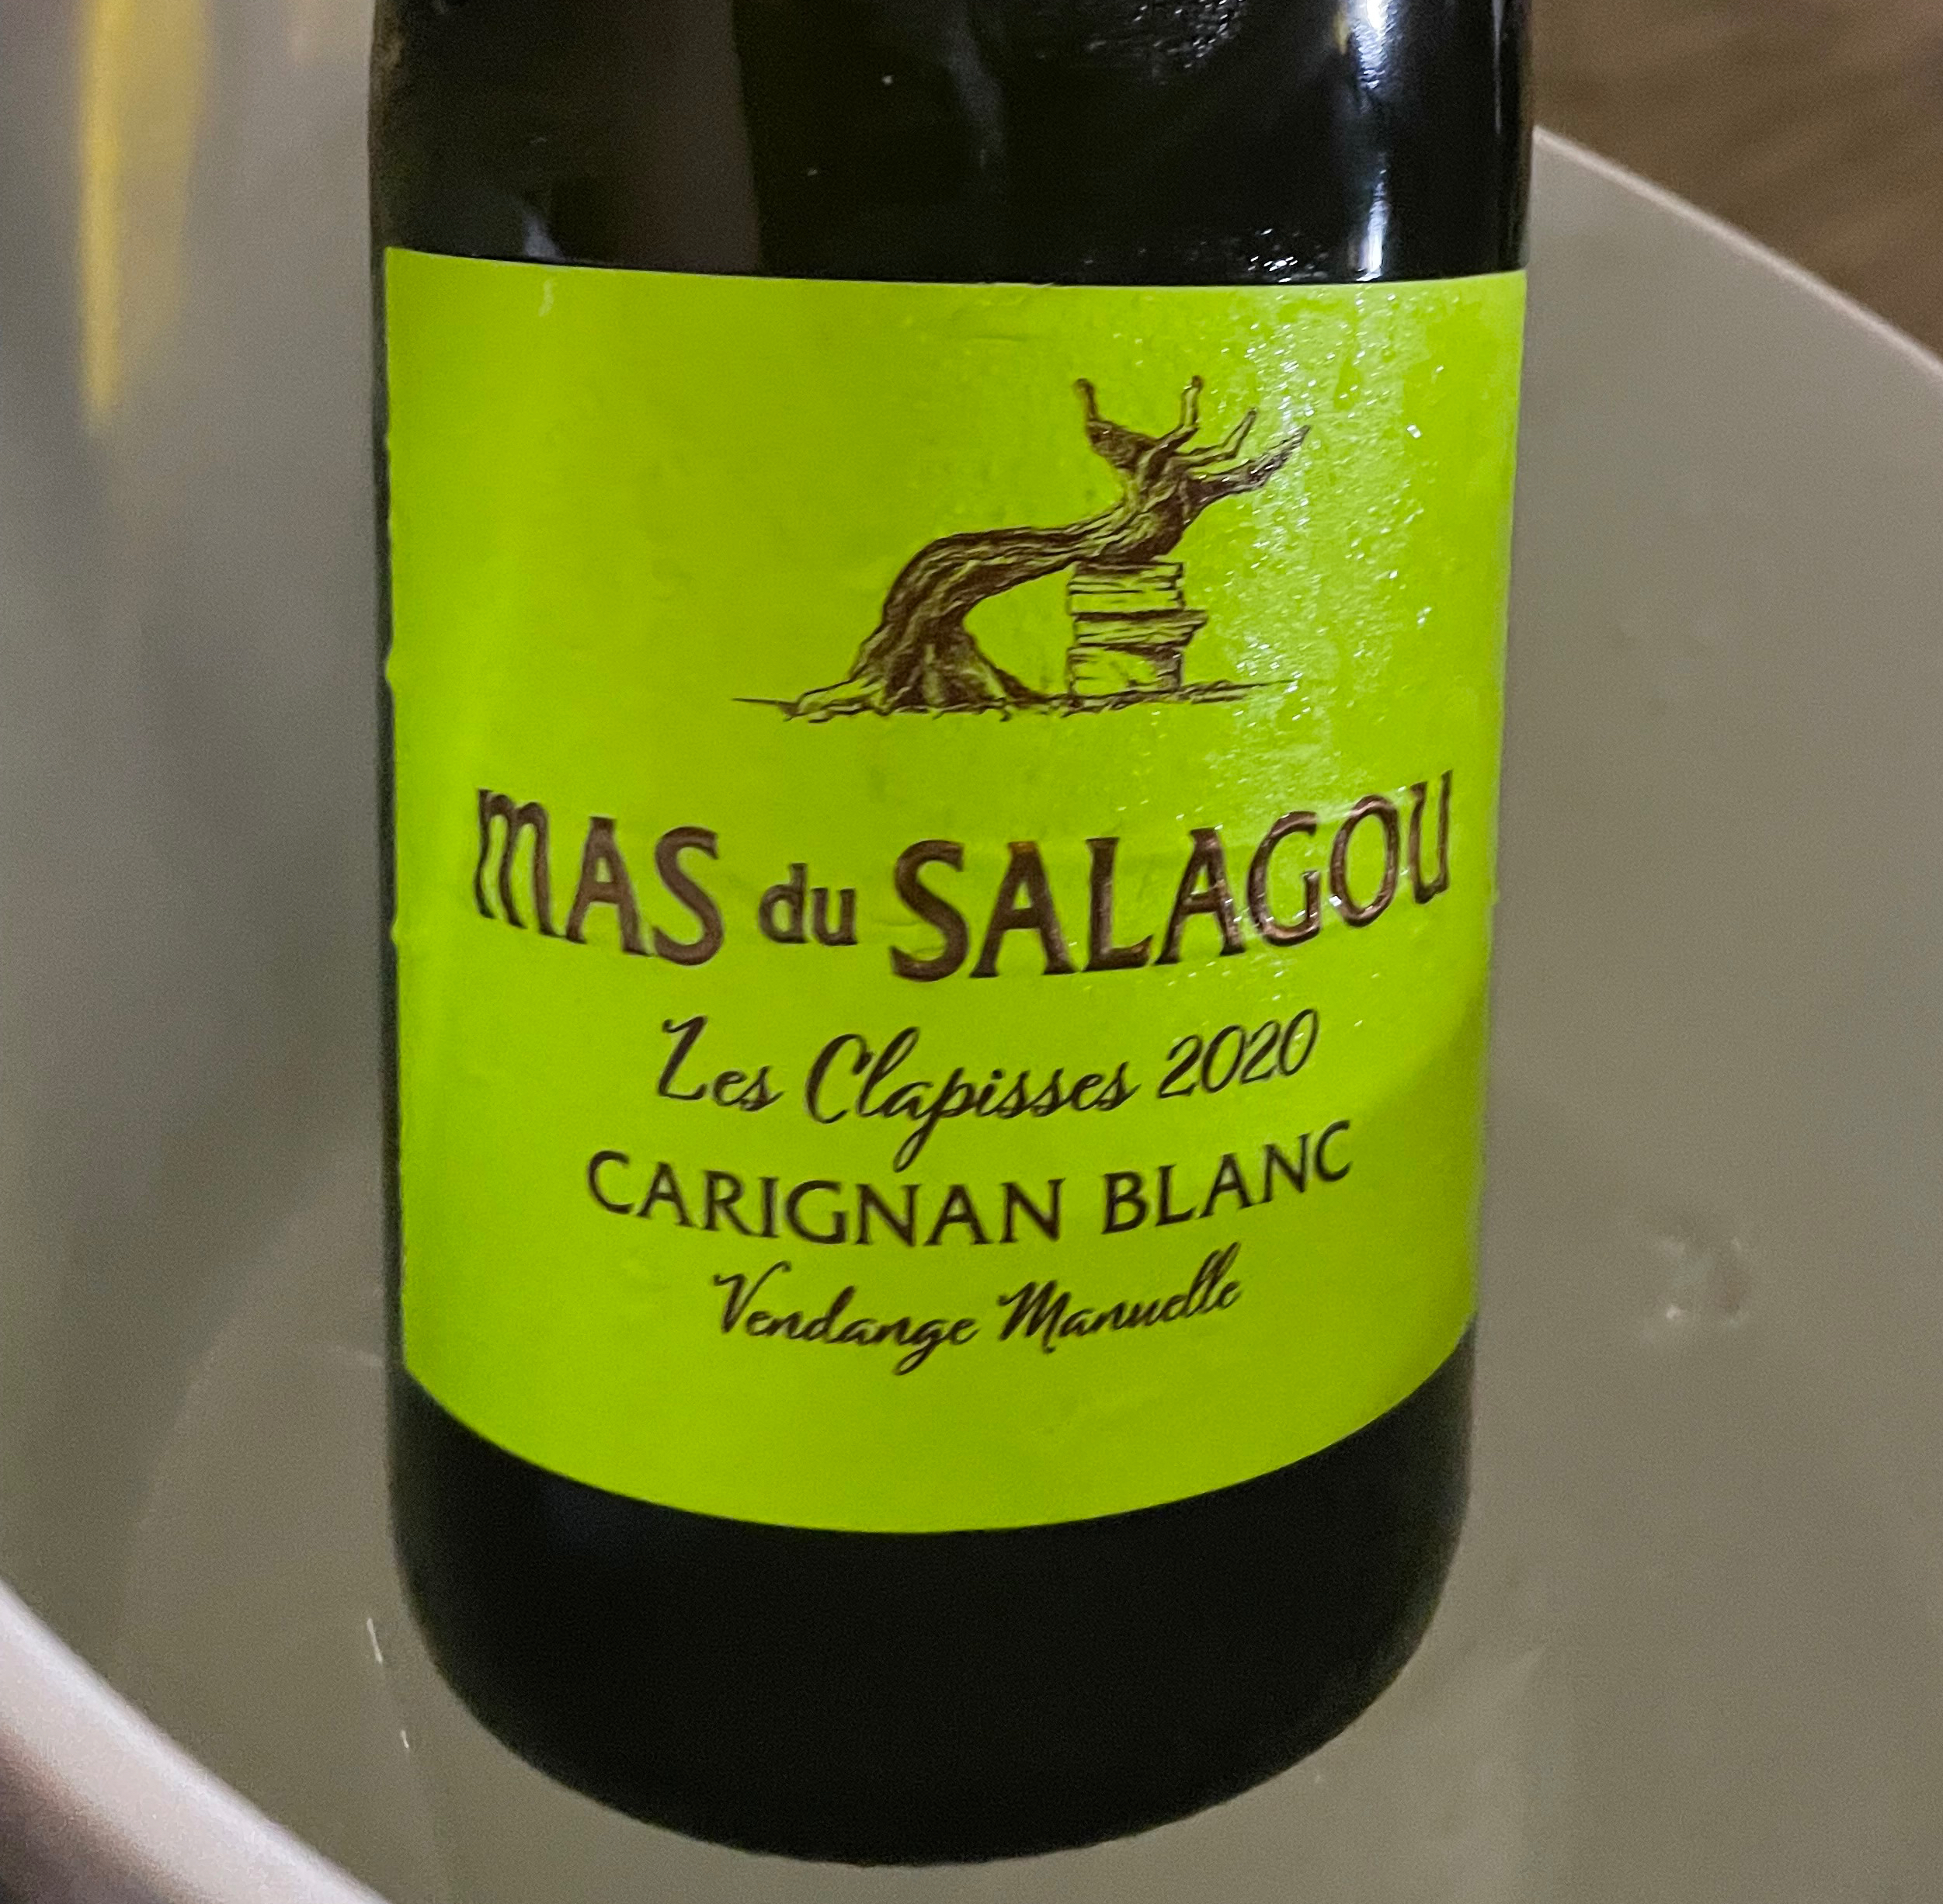 An interesting white - also from Salagou